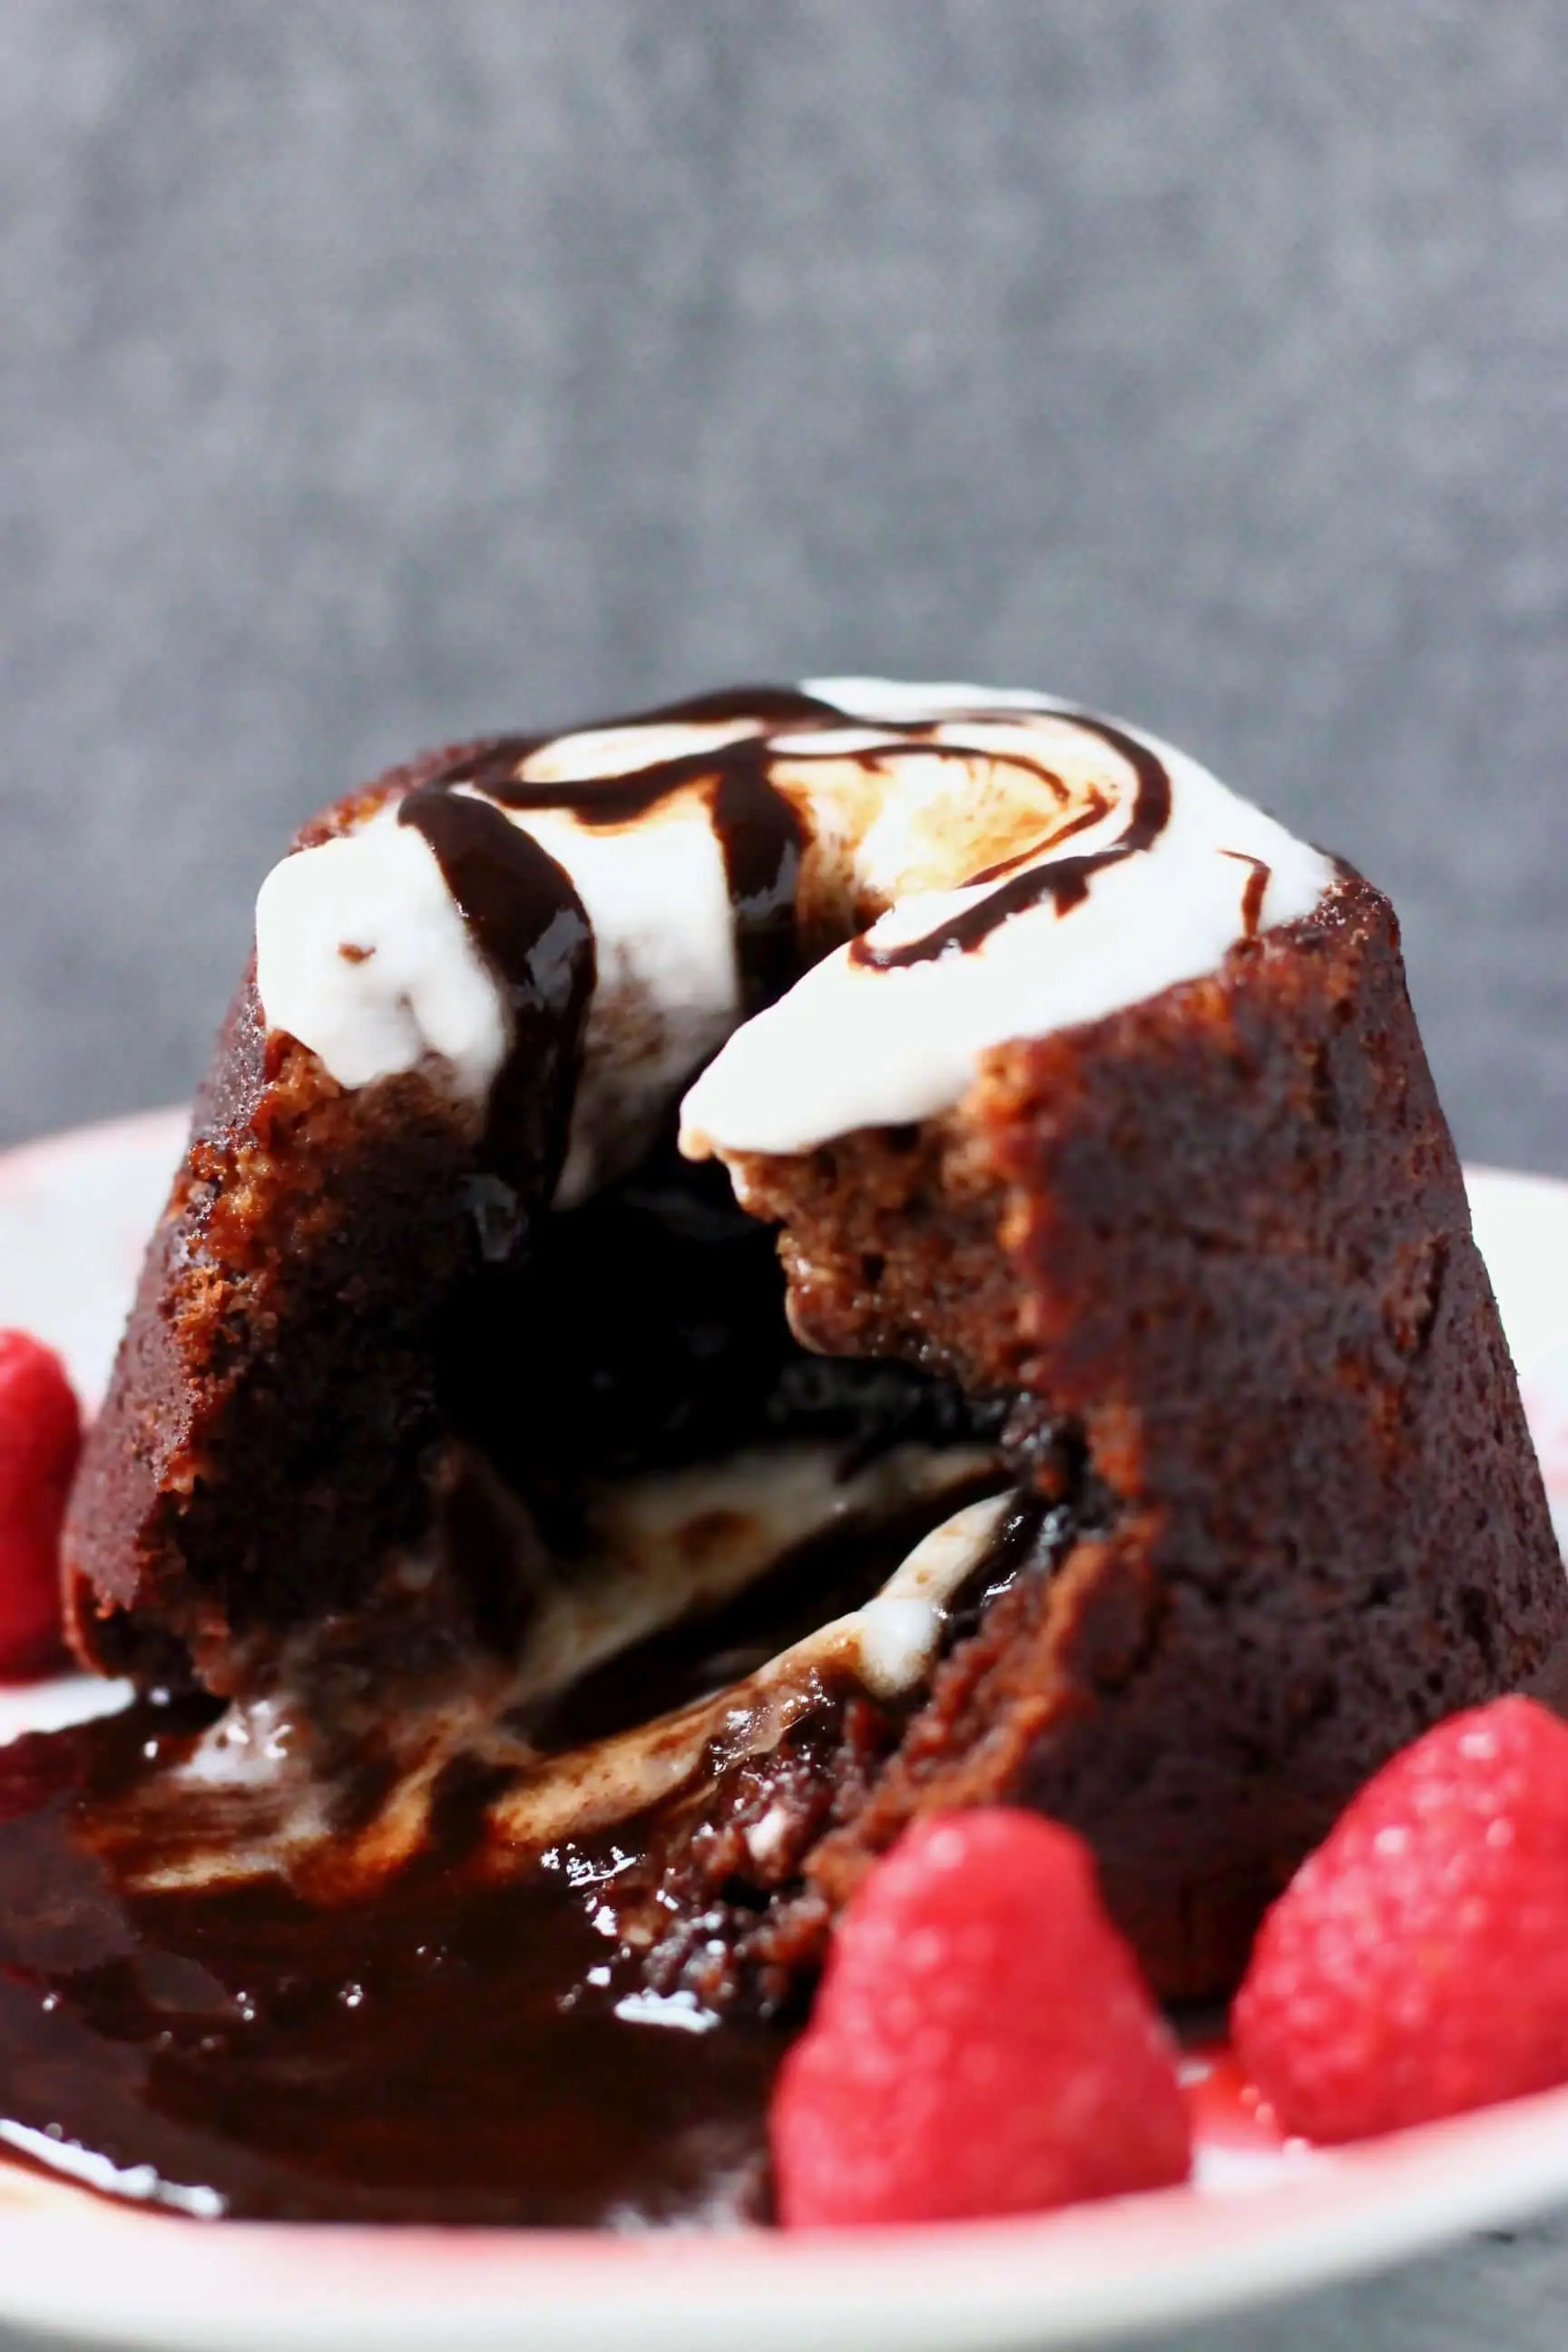 Gluten-free vegan chocolate lava cake on a plate with chocolate sauce flowing out of it topped with white cream and decorated with raspberries